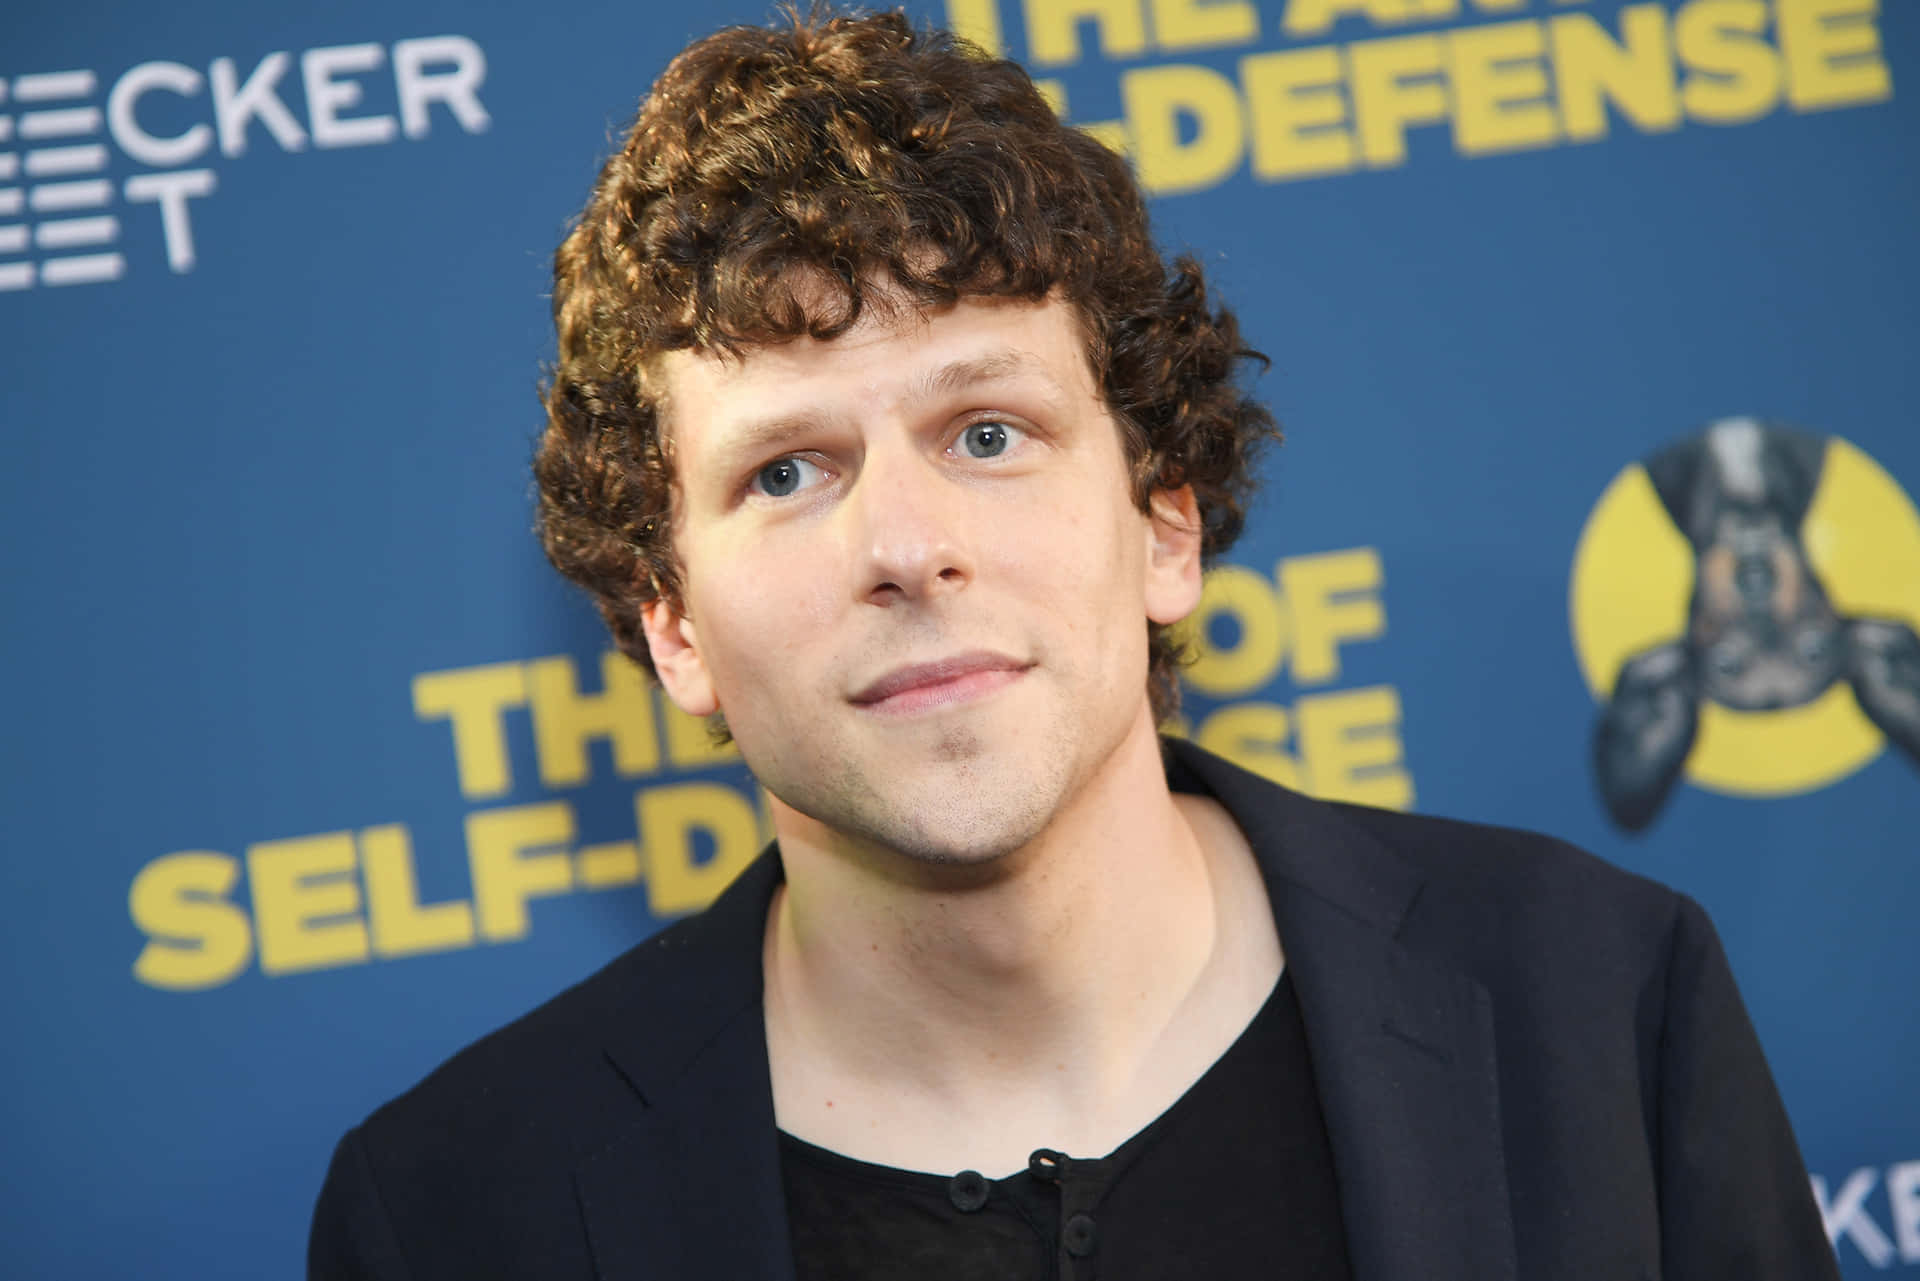 Jesseeisenberg Is An American Actor Known For His Roles In Films Such As The Social Network And Zombieland. He Has Received Critical Acclaim For His Performances And Has Been Nominated For Several Awards. Eisenberg's Talent And Versatility Have Made Him A Highly Sought-after Actor In The Industry. Fondo de pantalla